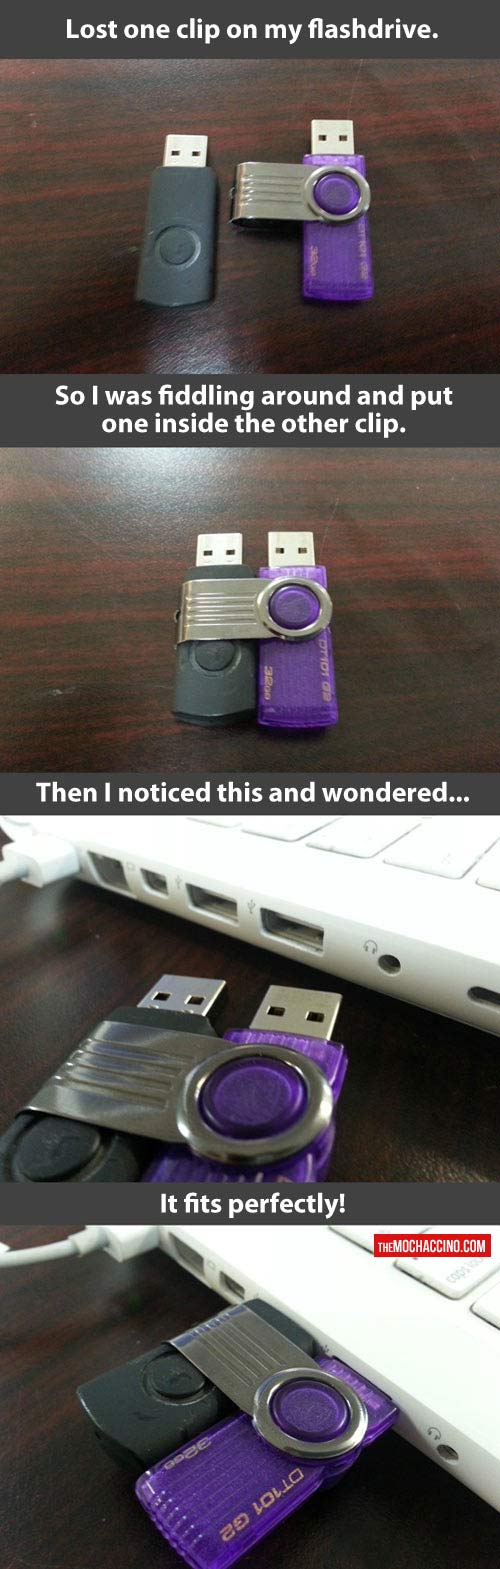 Flash drives are perfect together…